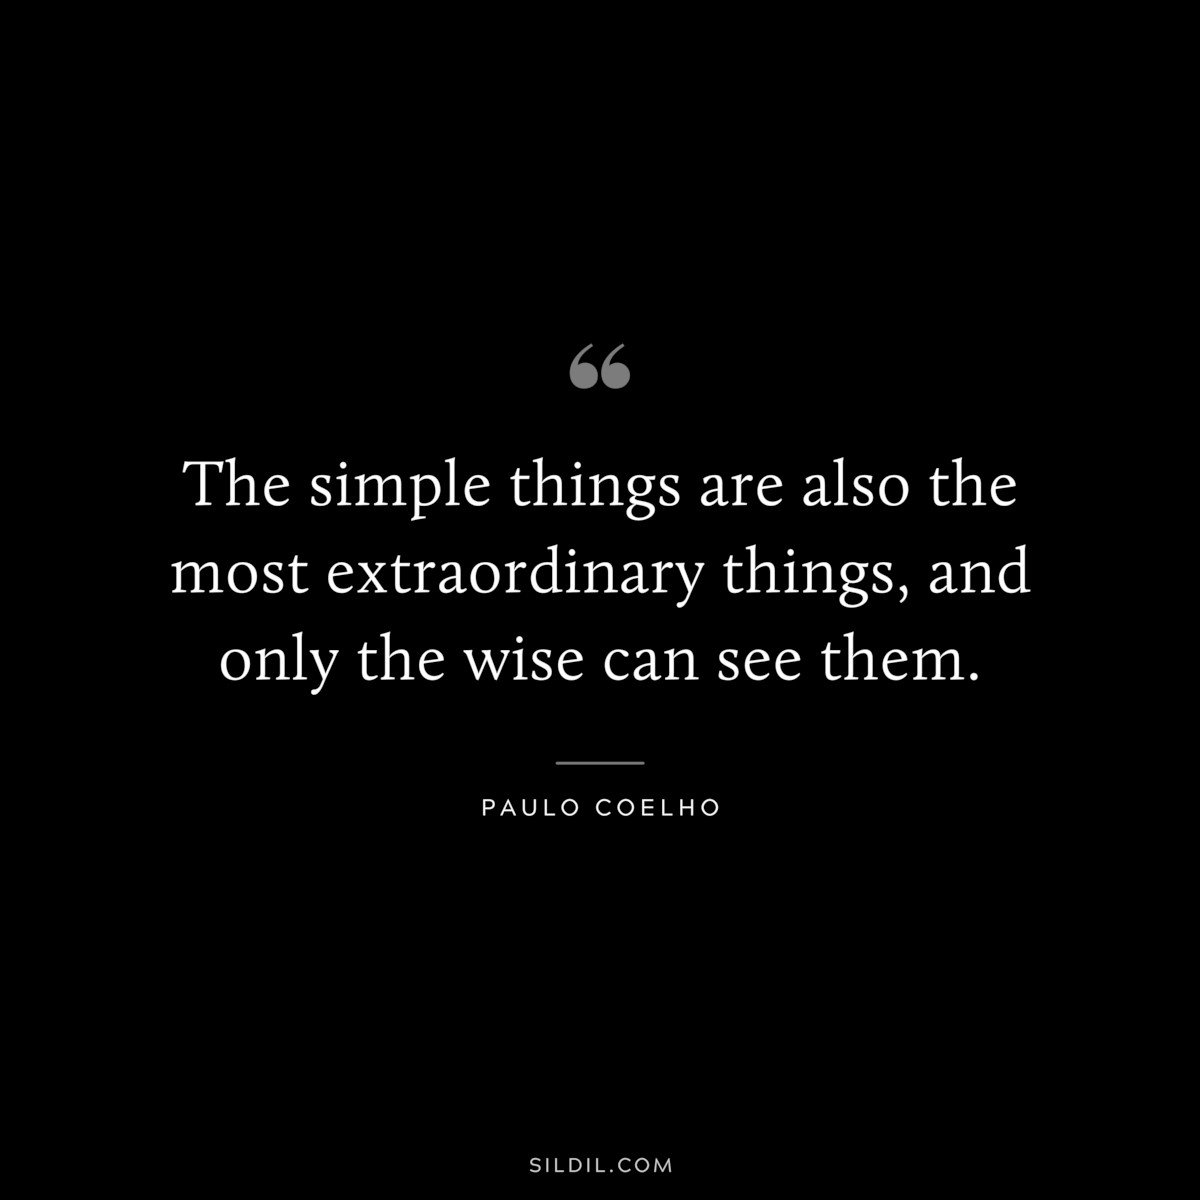 The simple things are also the most extraordinary things, and only the wise can see them. ― Paulo Coelho